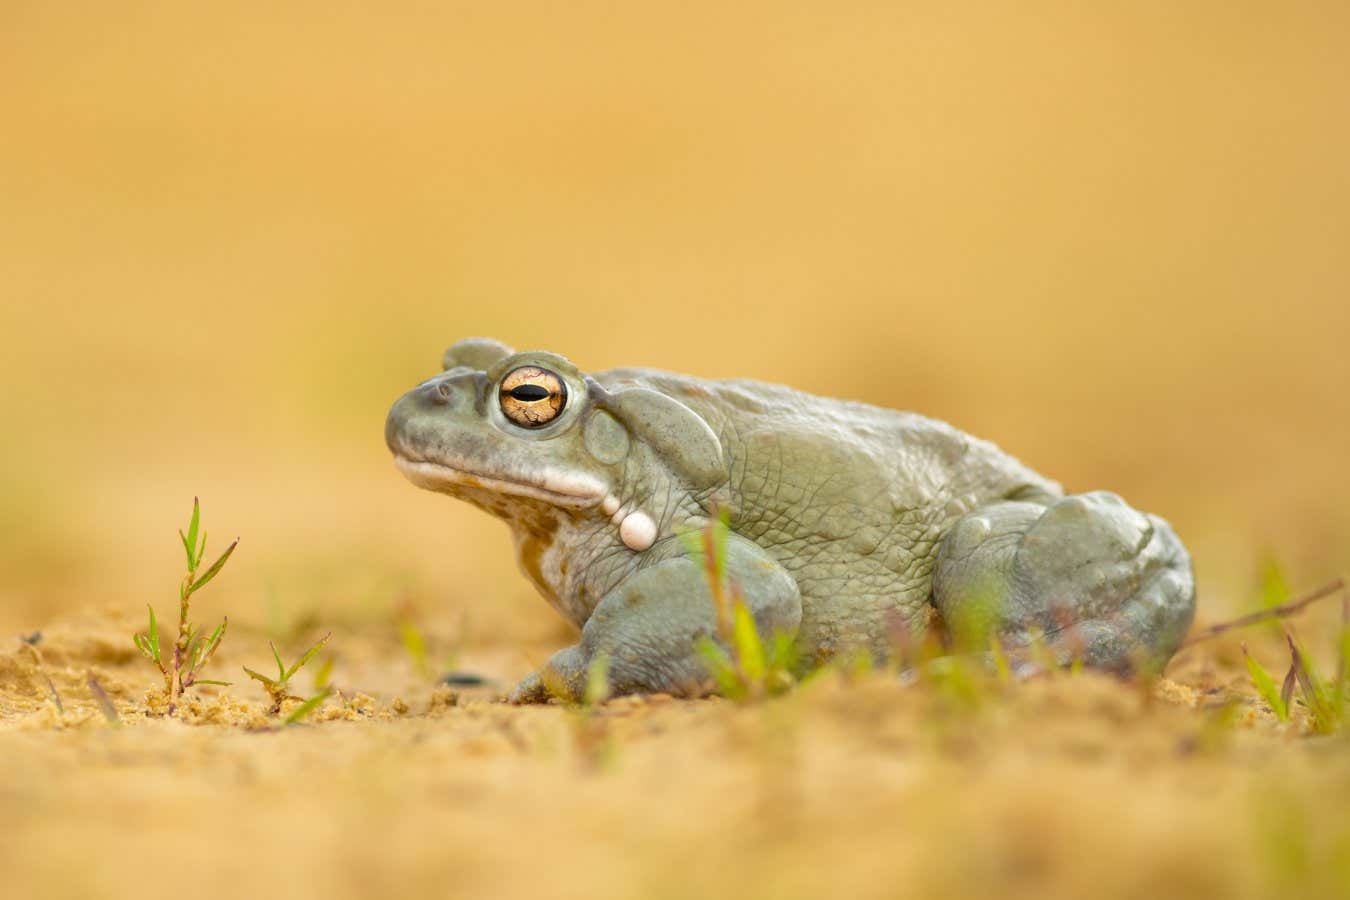 Psychedelic toxins from toads could treat depression and anxiety